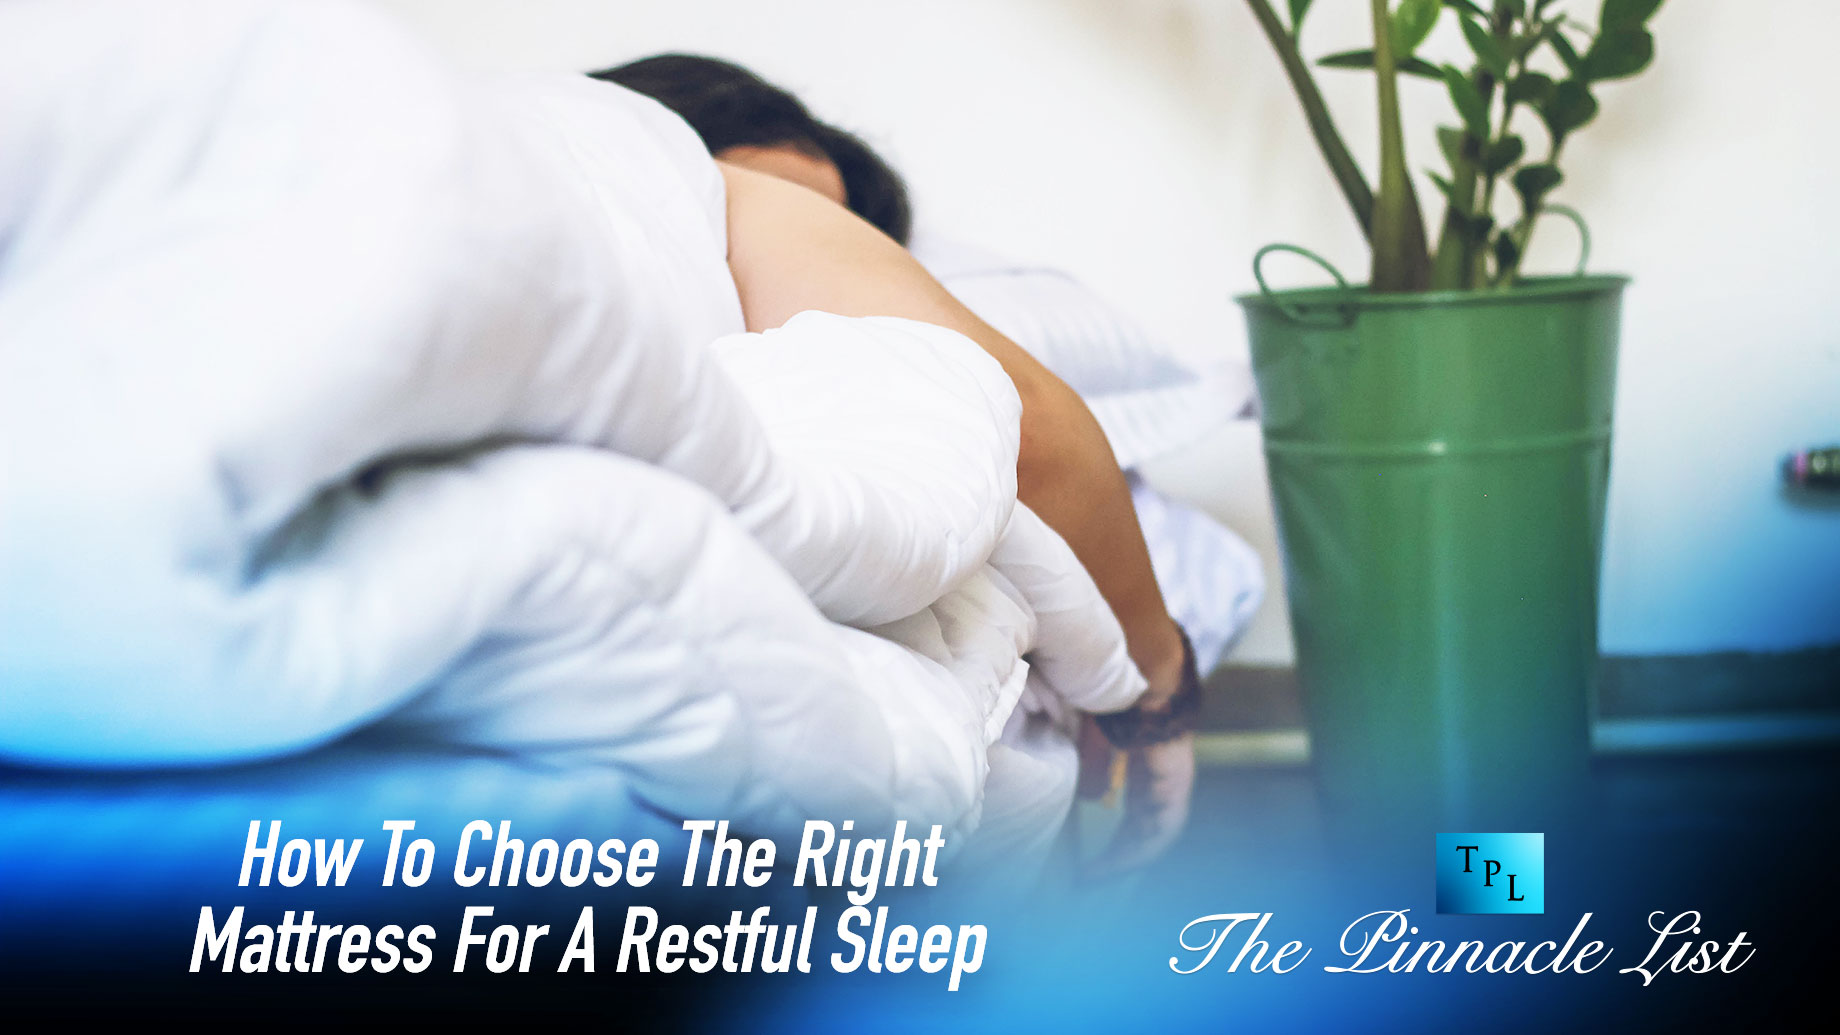 How To Choose The Right Mattress For A Restful Sleep